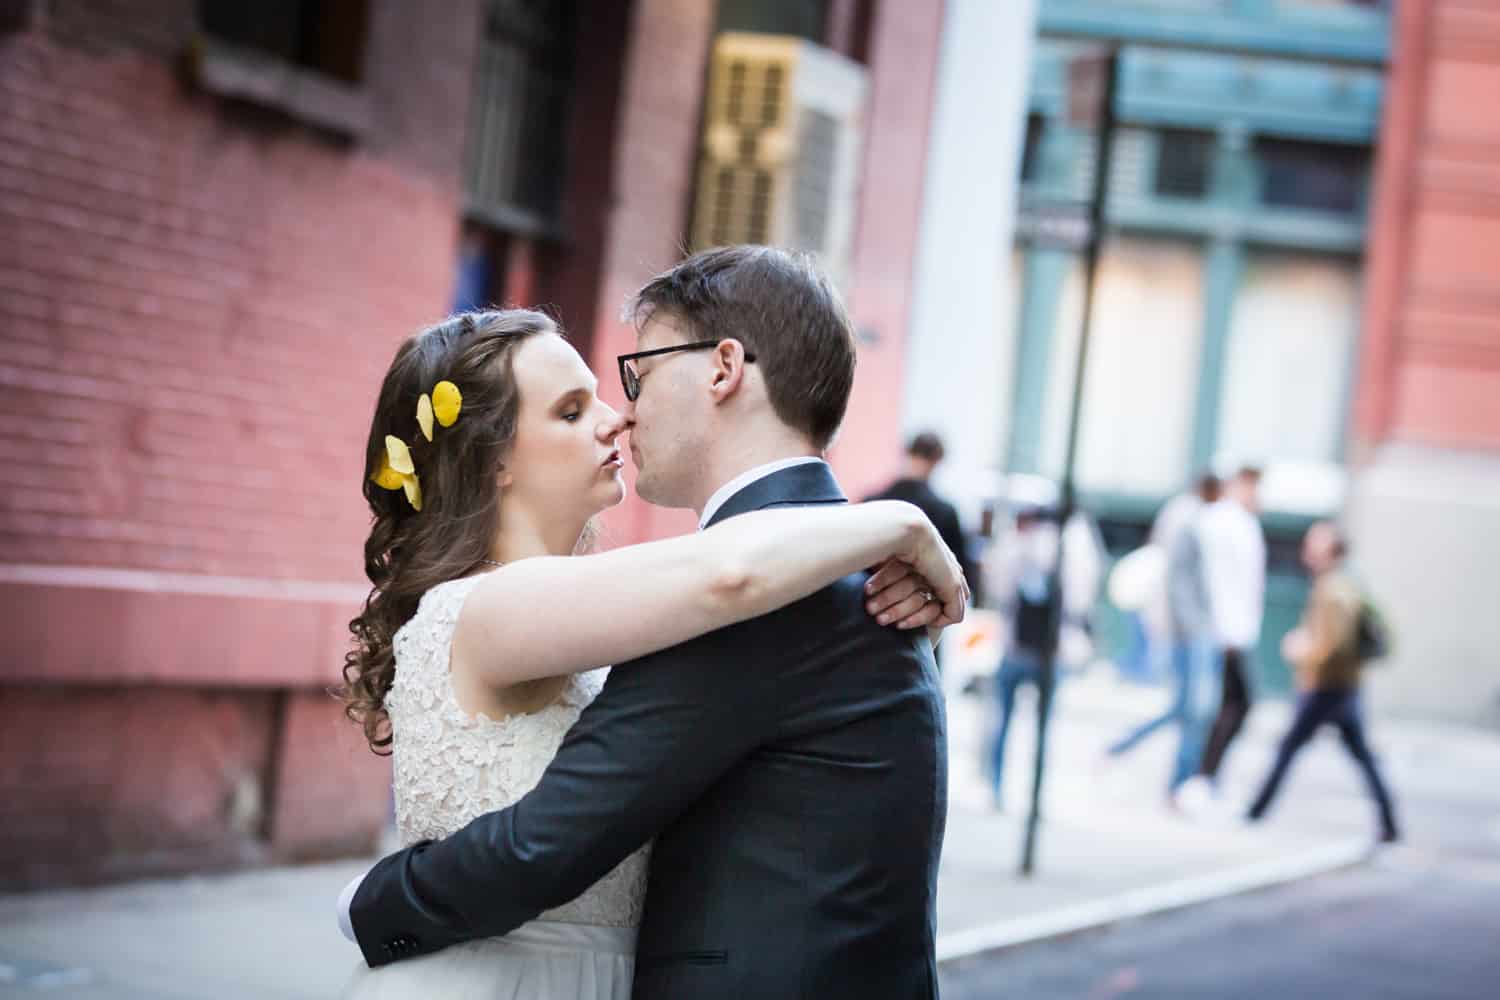 Bride and groom about to kiss in alleyway for an article on Covid-19 wedding planning